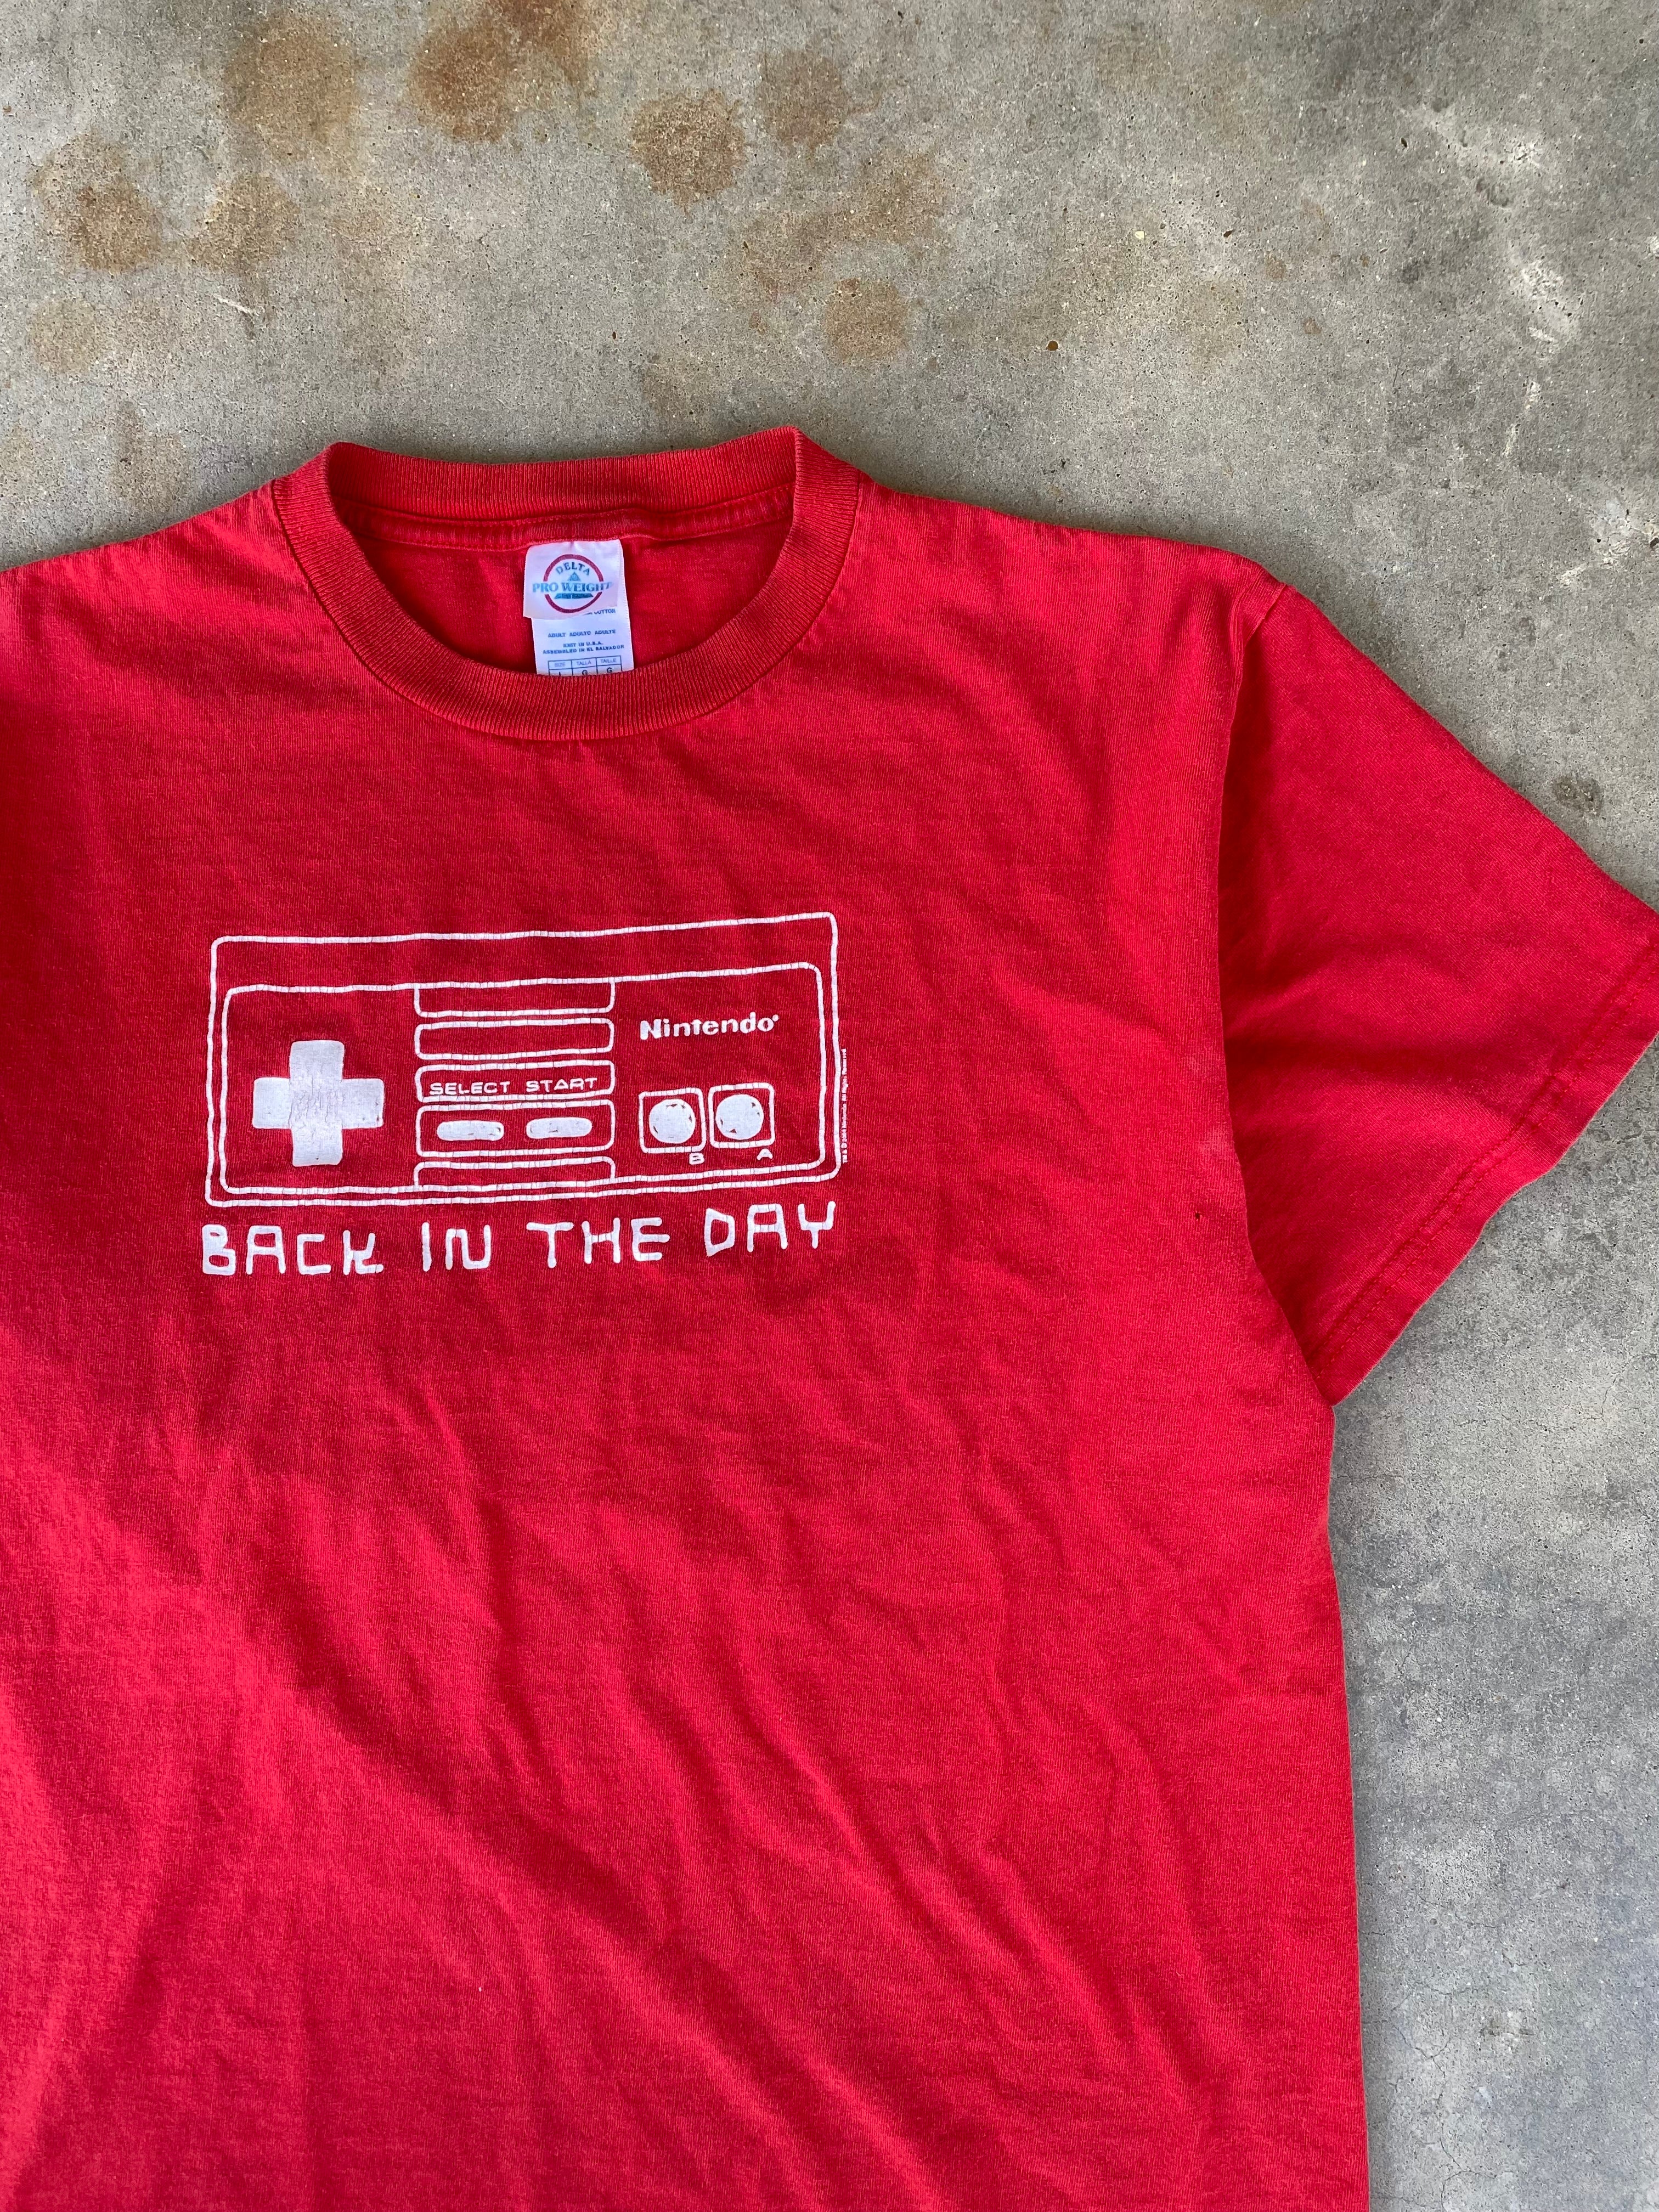 2004 Nintendo "Back in the Day" T-Shirt